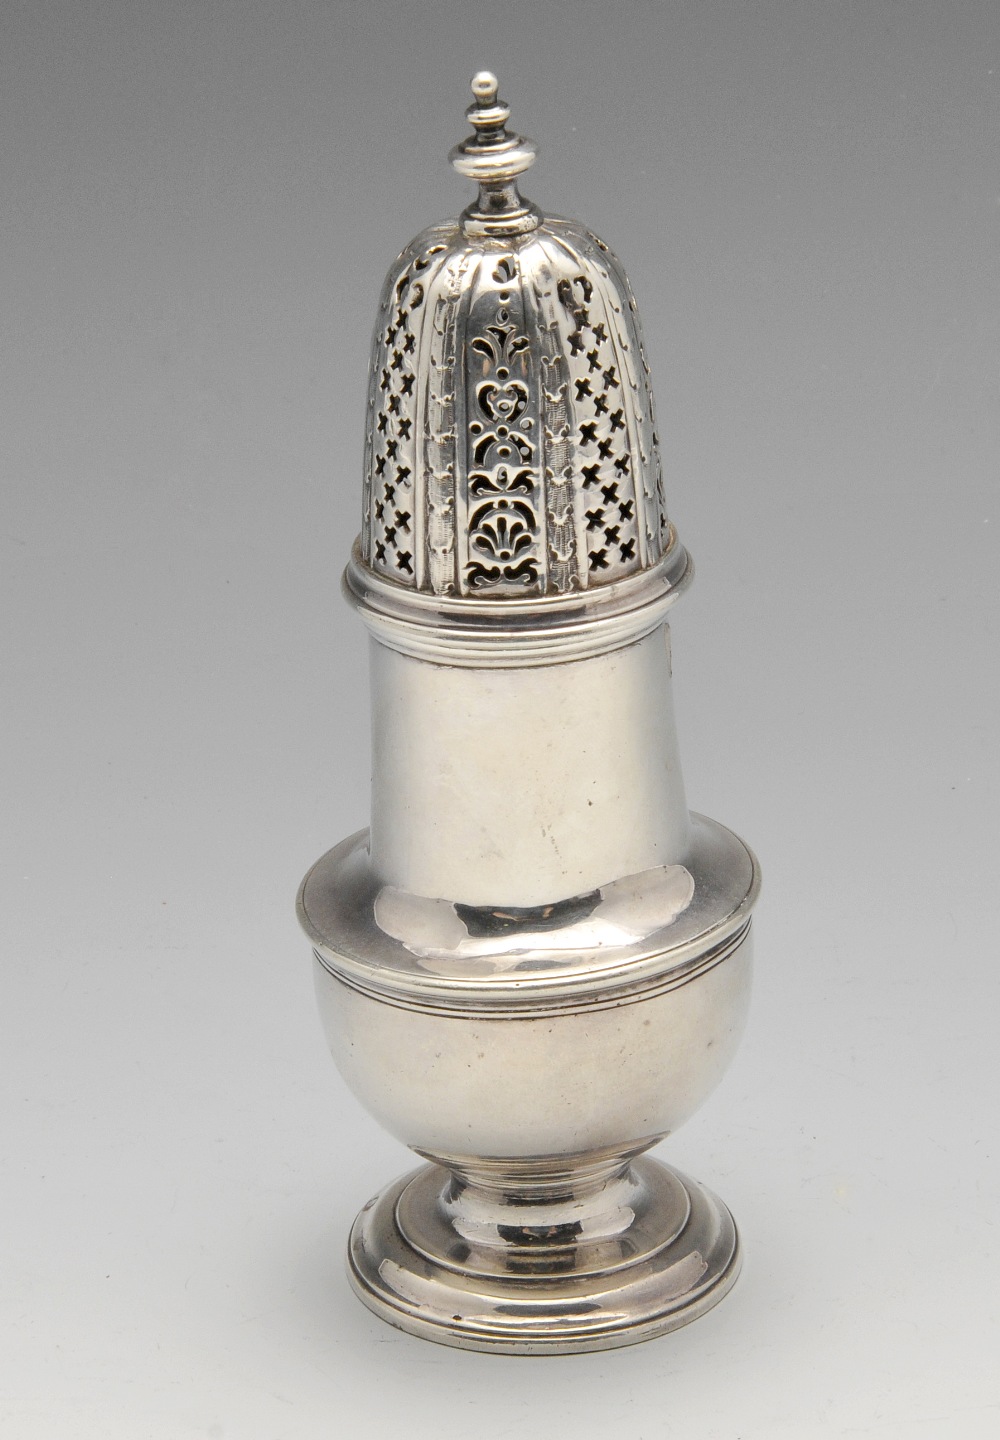 A George II silver caster of vase form with pierced cover and baluster finial. Hallmarked London